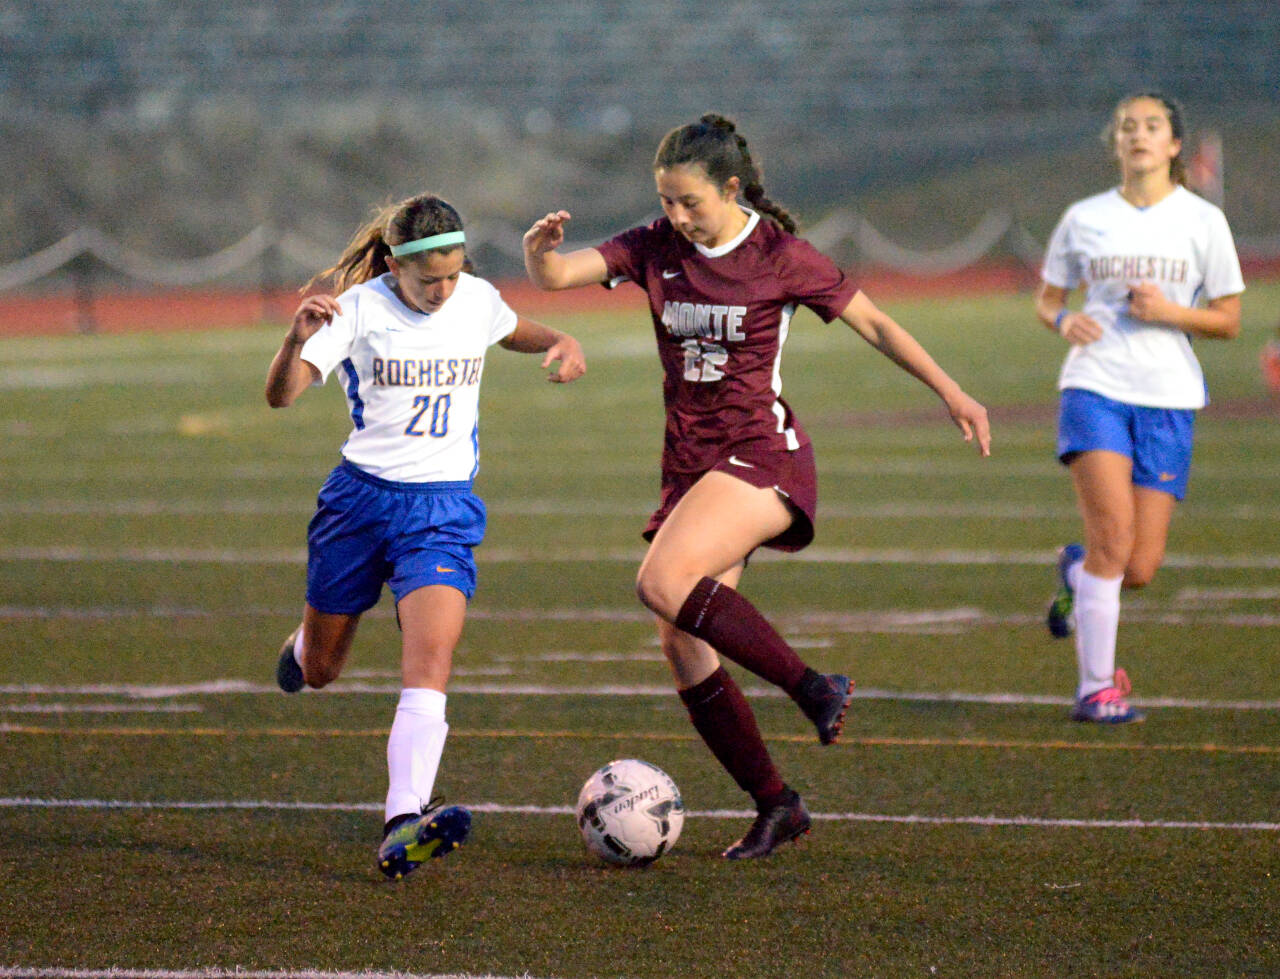 RYAN SPARKS | THE DAILY WORLD Montesano midfielder Bethanie Henderson (22) dribbles against Rochester on Tuesday in Montesano. The Bulldogs won 8-0.